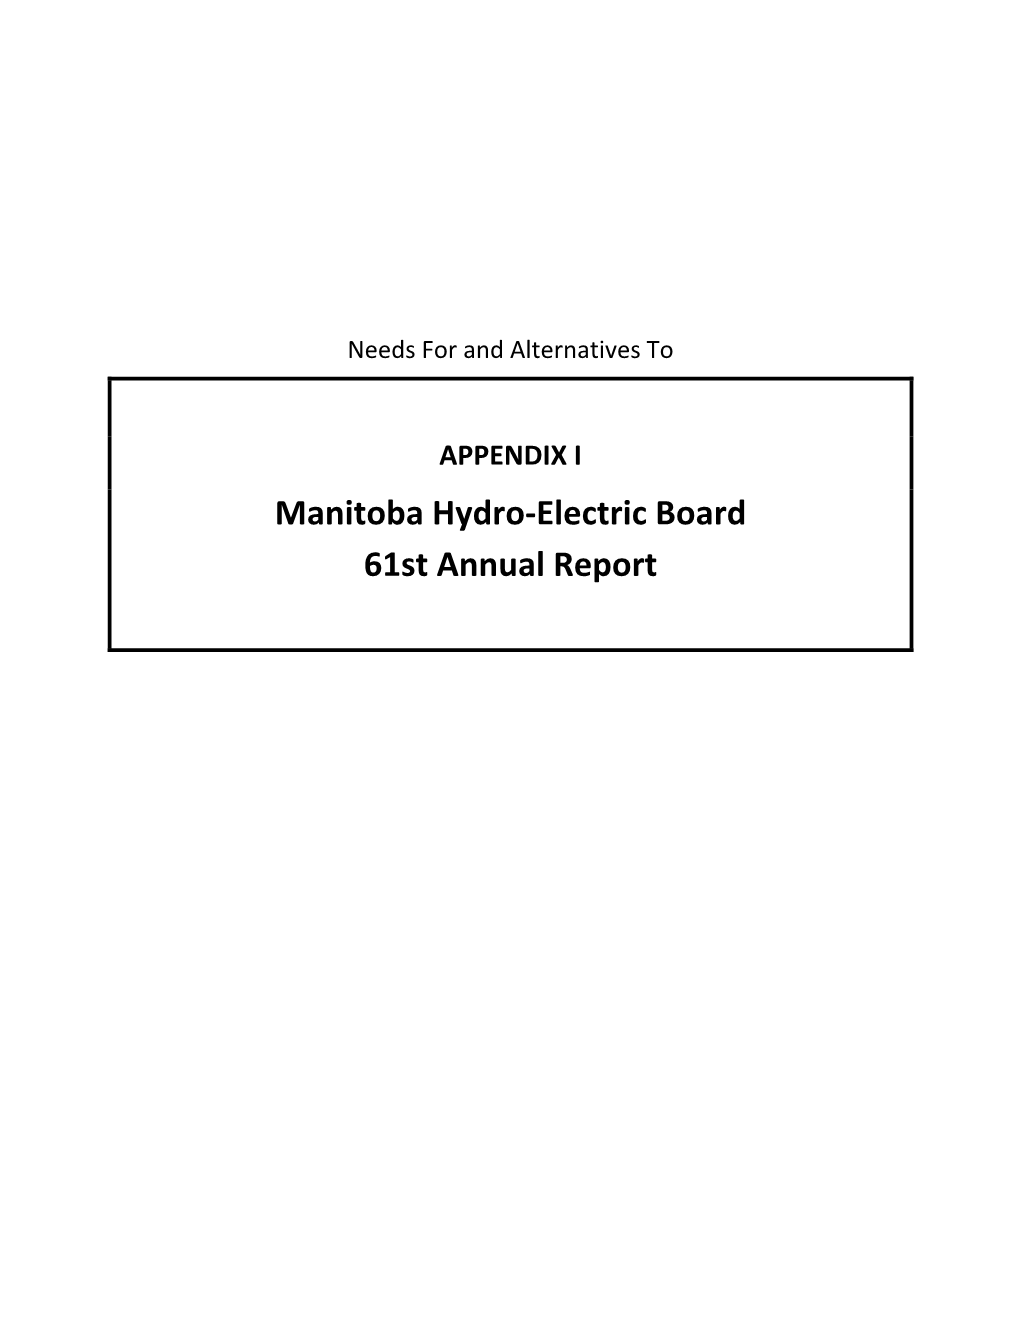 Manitoba Hydro-Electric Board 61St Annual Report for the Year Ended March 31, 2012